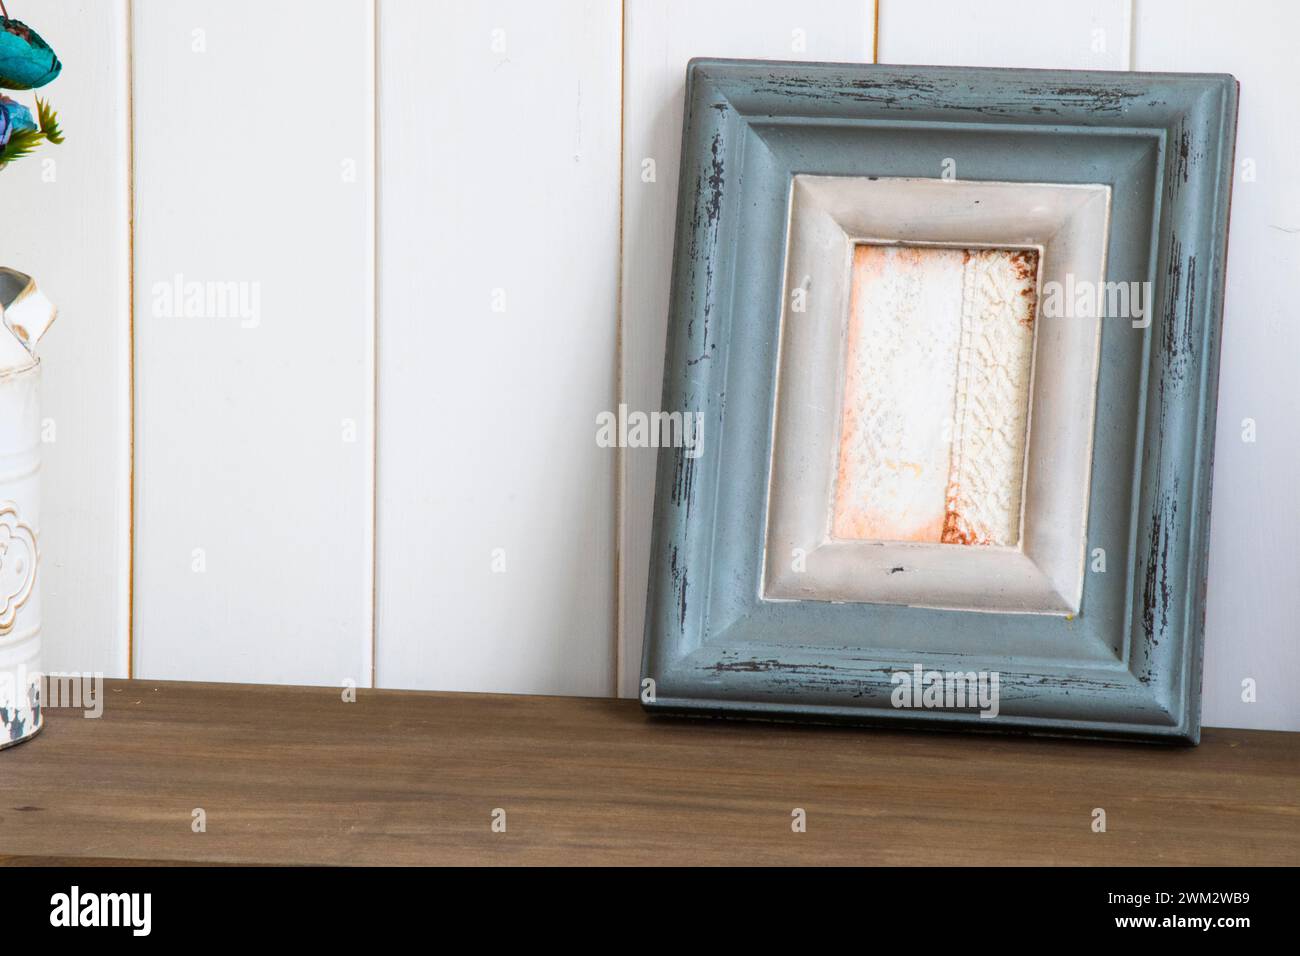 A tiny vase of flowers on wooden table next to picture frame Stock Photo